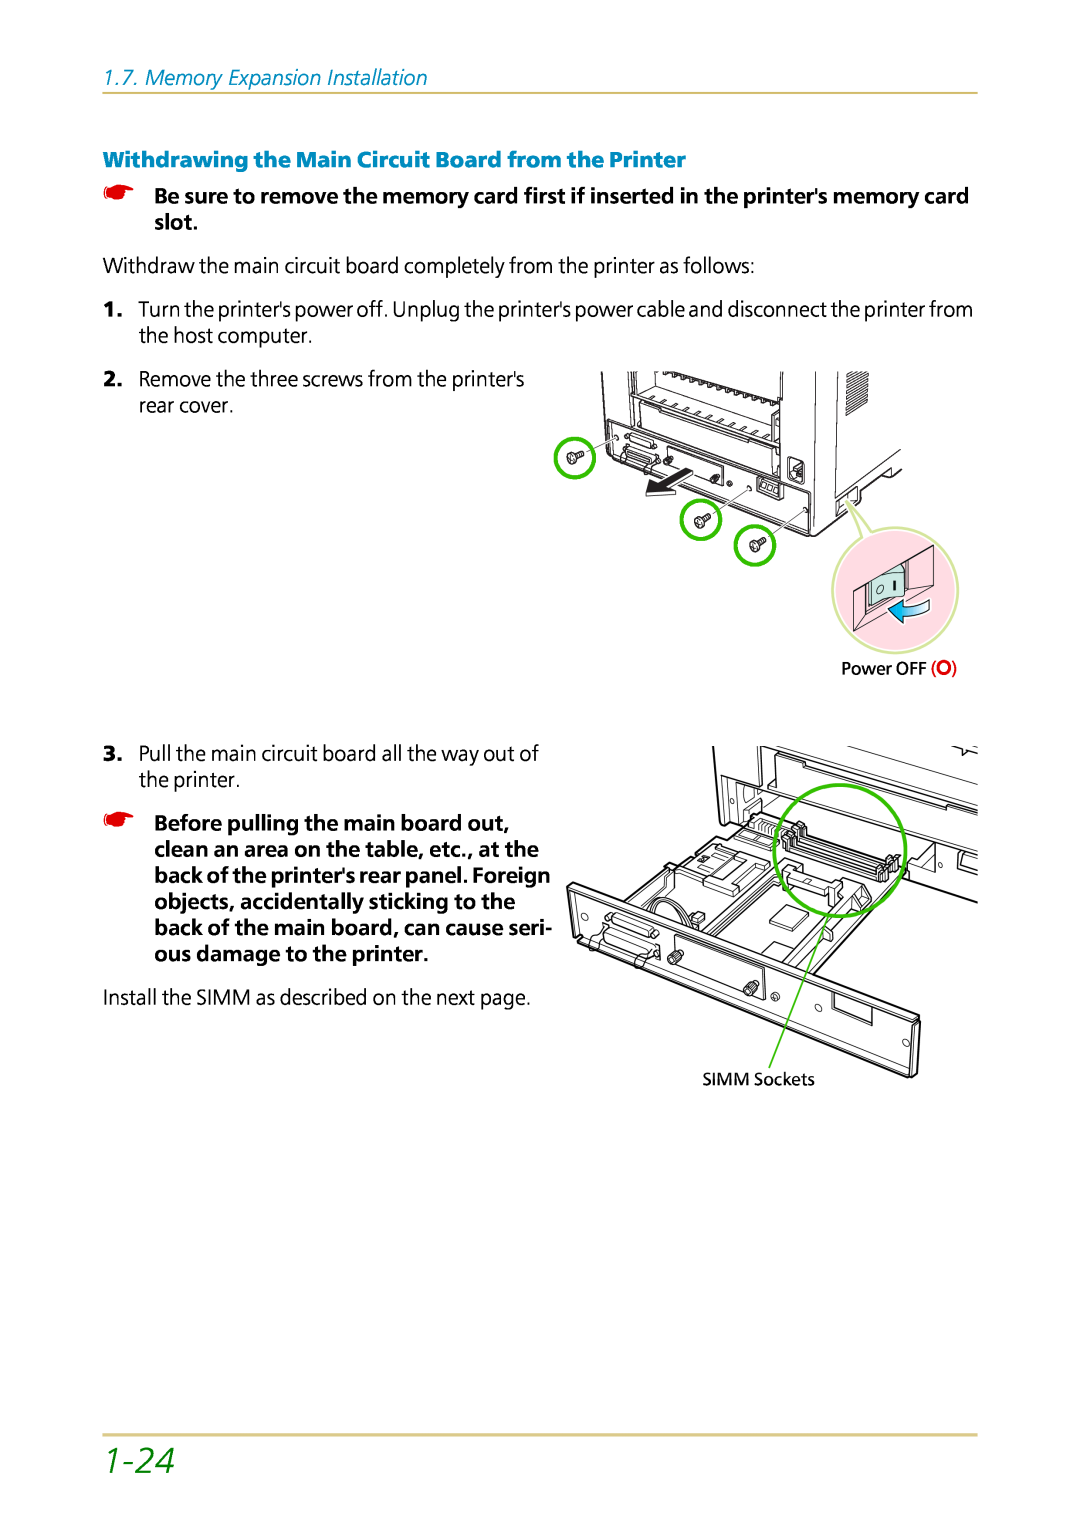 Kyocera FS-1700 user manual 1-24, Memory Expansion Installation, Install the SIMM as described on the next page 